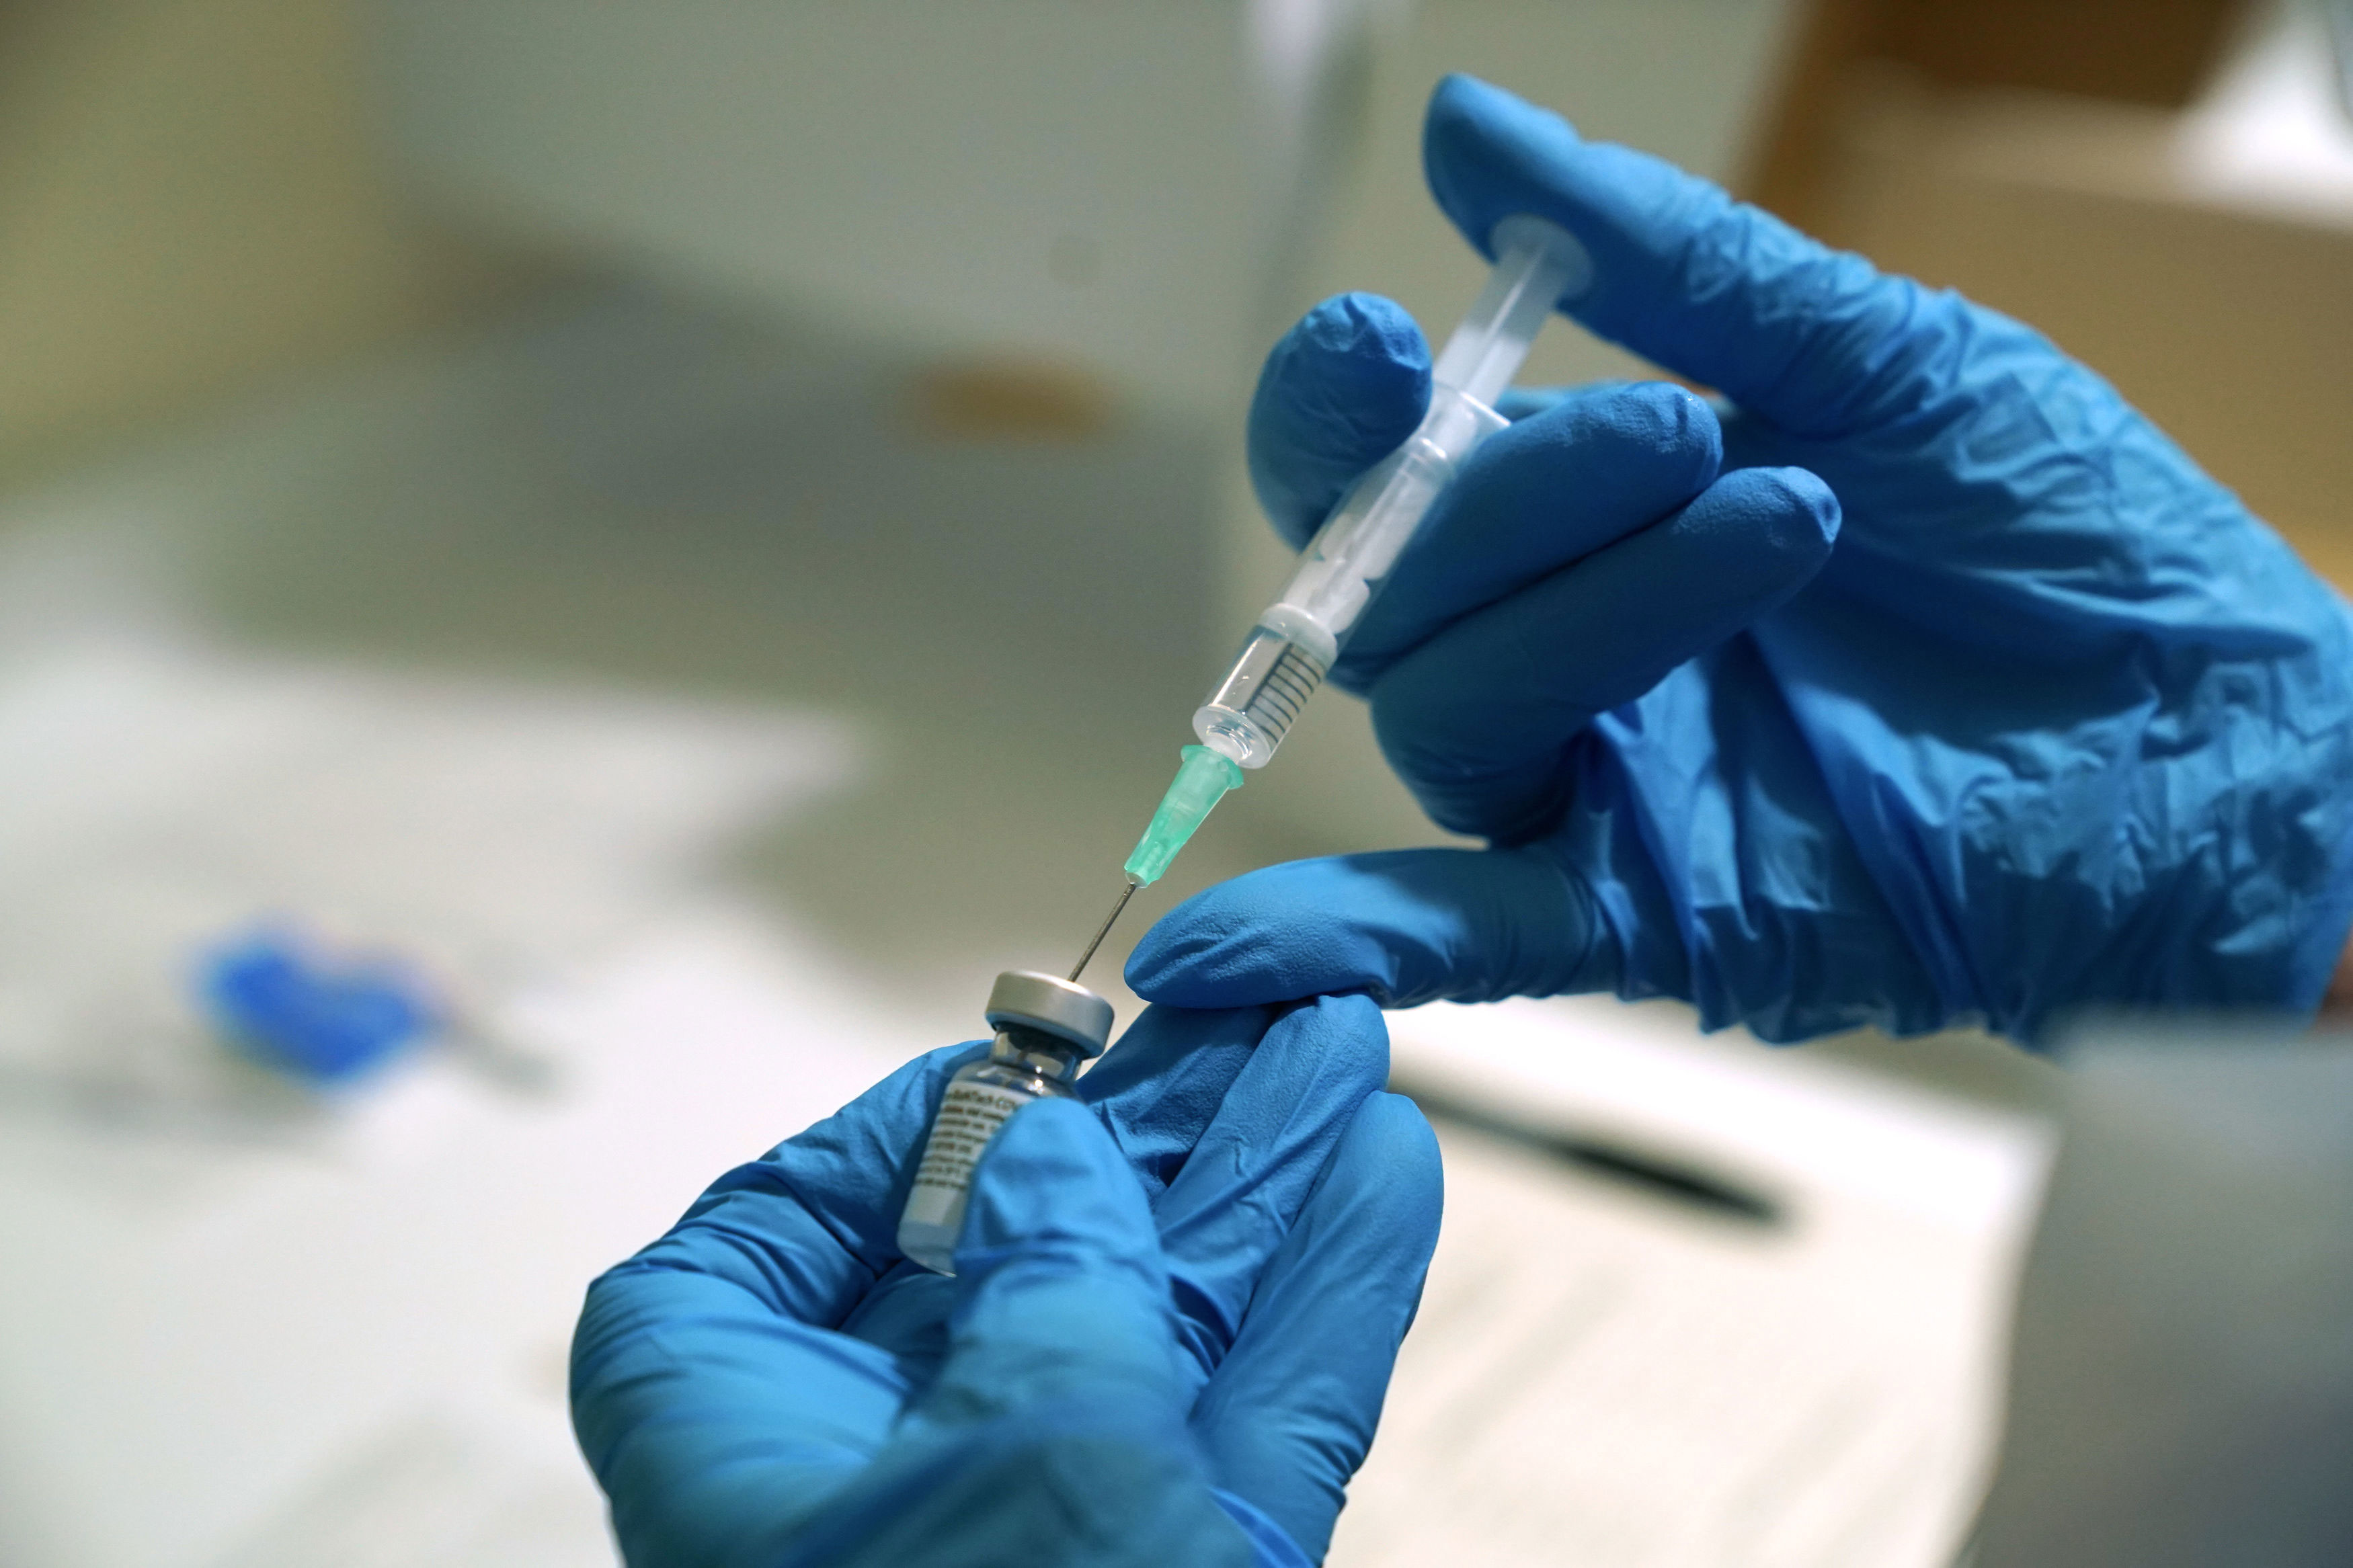 A needle is filled from a vial of the Pfizer-BioNTech Covid-19 vaccine in Newcastle, England, on December 8.